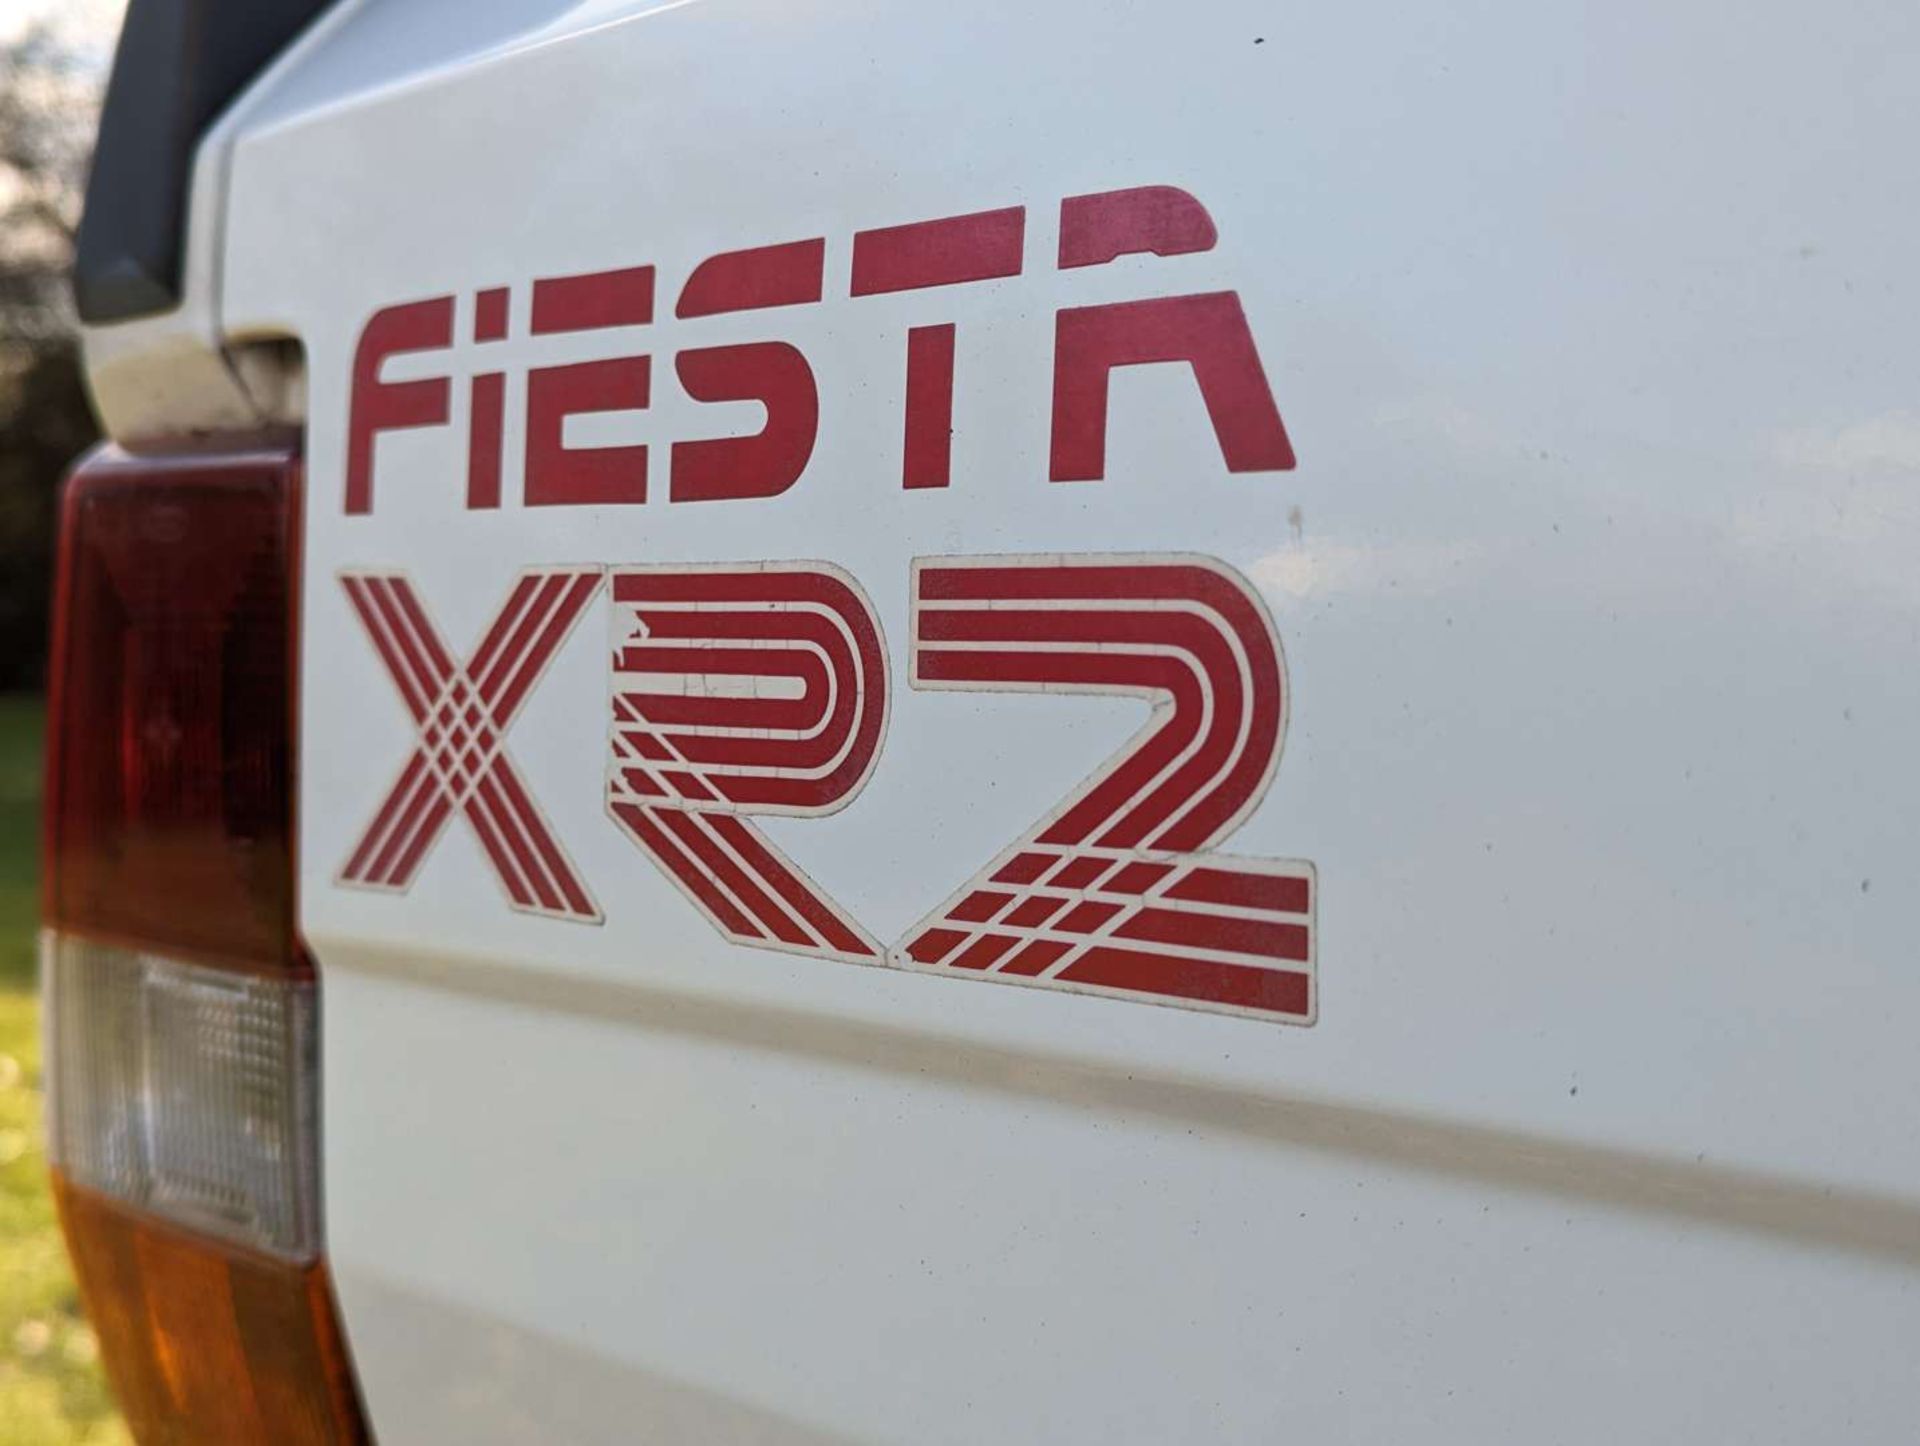 1988 FORD FIESTA XR2 - Image 25 of 30